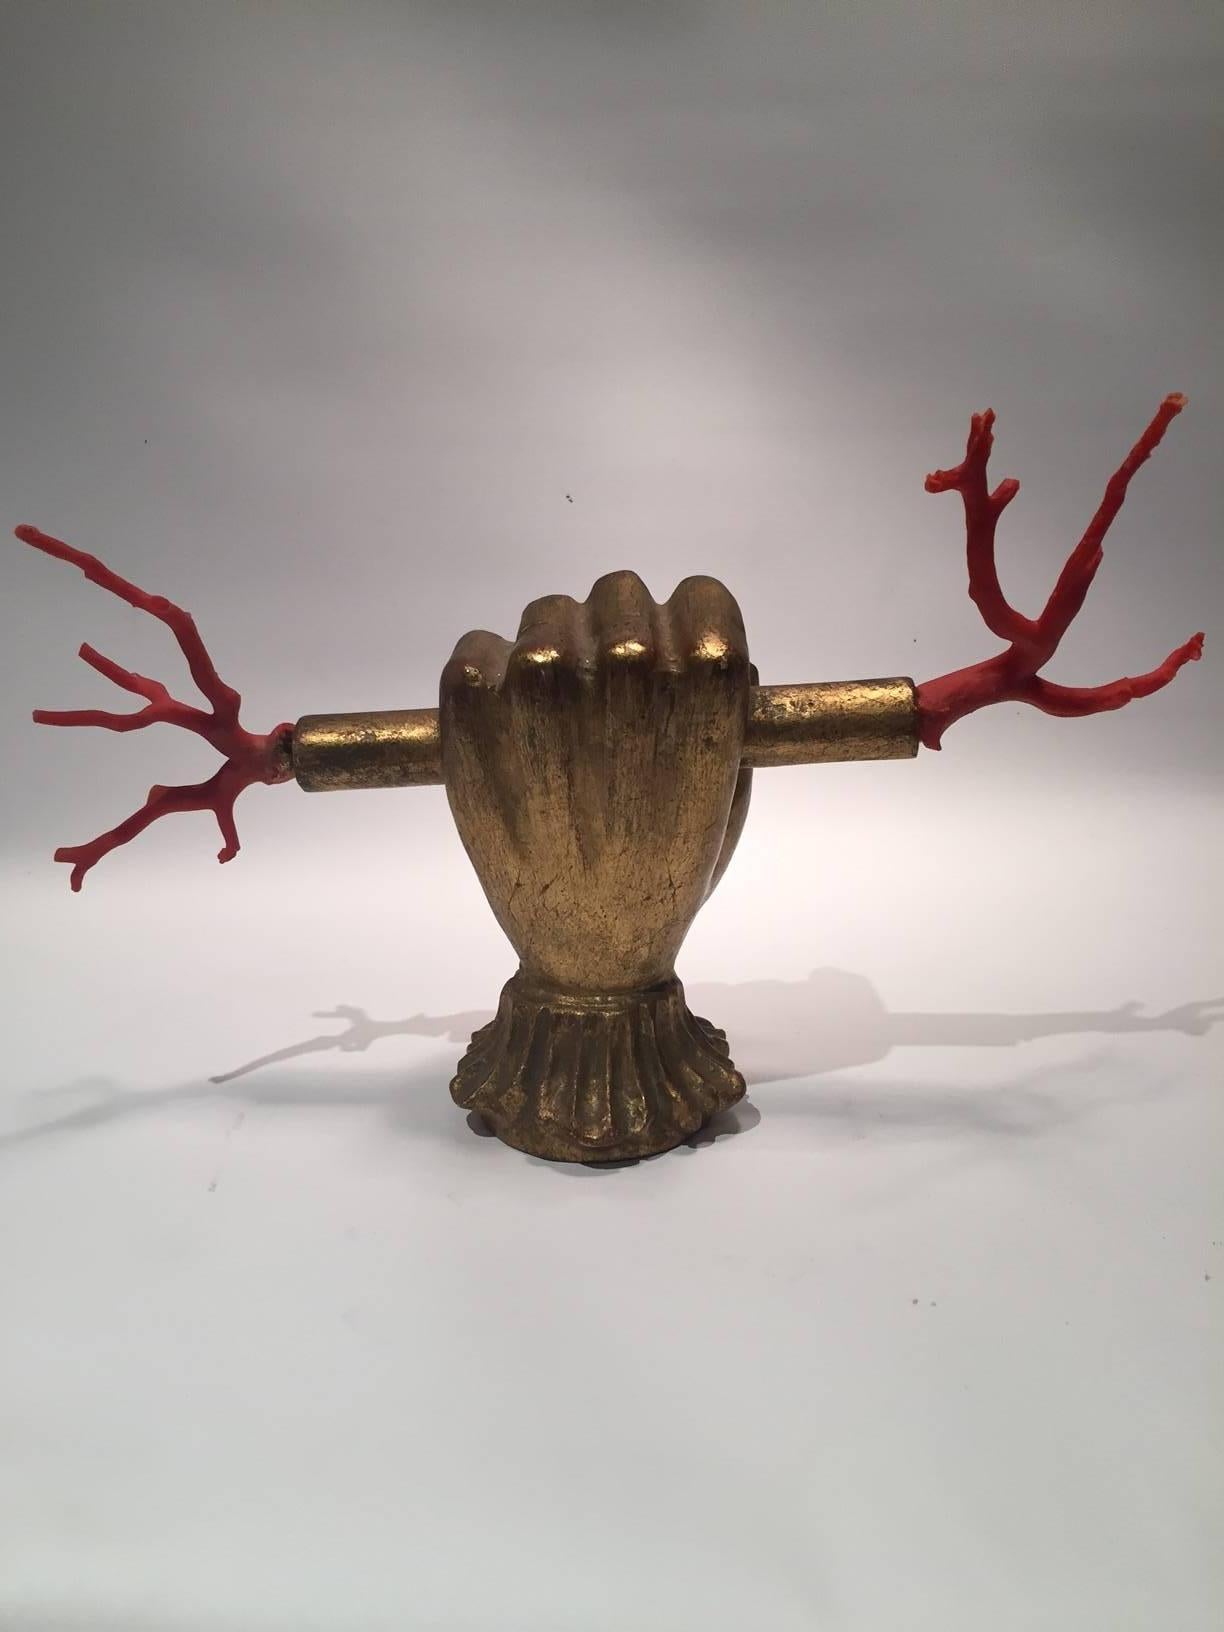 Italian gilded wooden hand clutching a red Mediterranean coral lightning staff, early to mid-20th century.
Mediterranean red coral has fascinated civilizations for thousands of years, given its intriguing nature, and has been classified as animal,